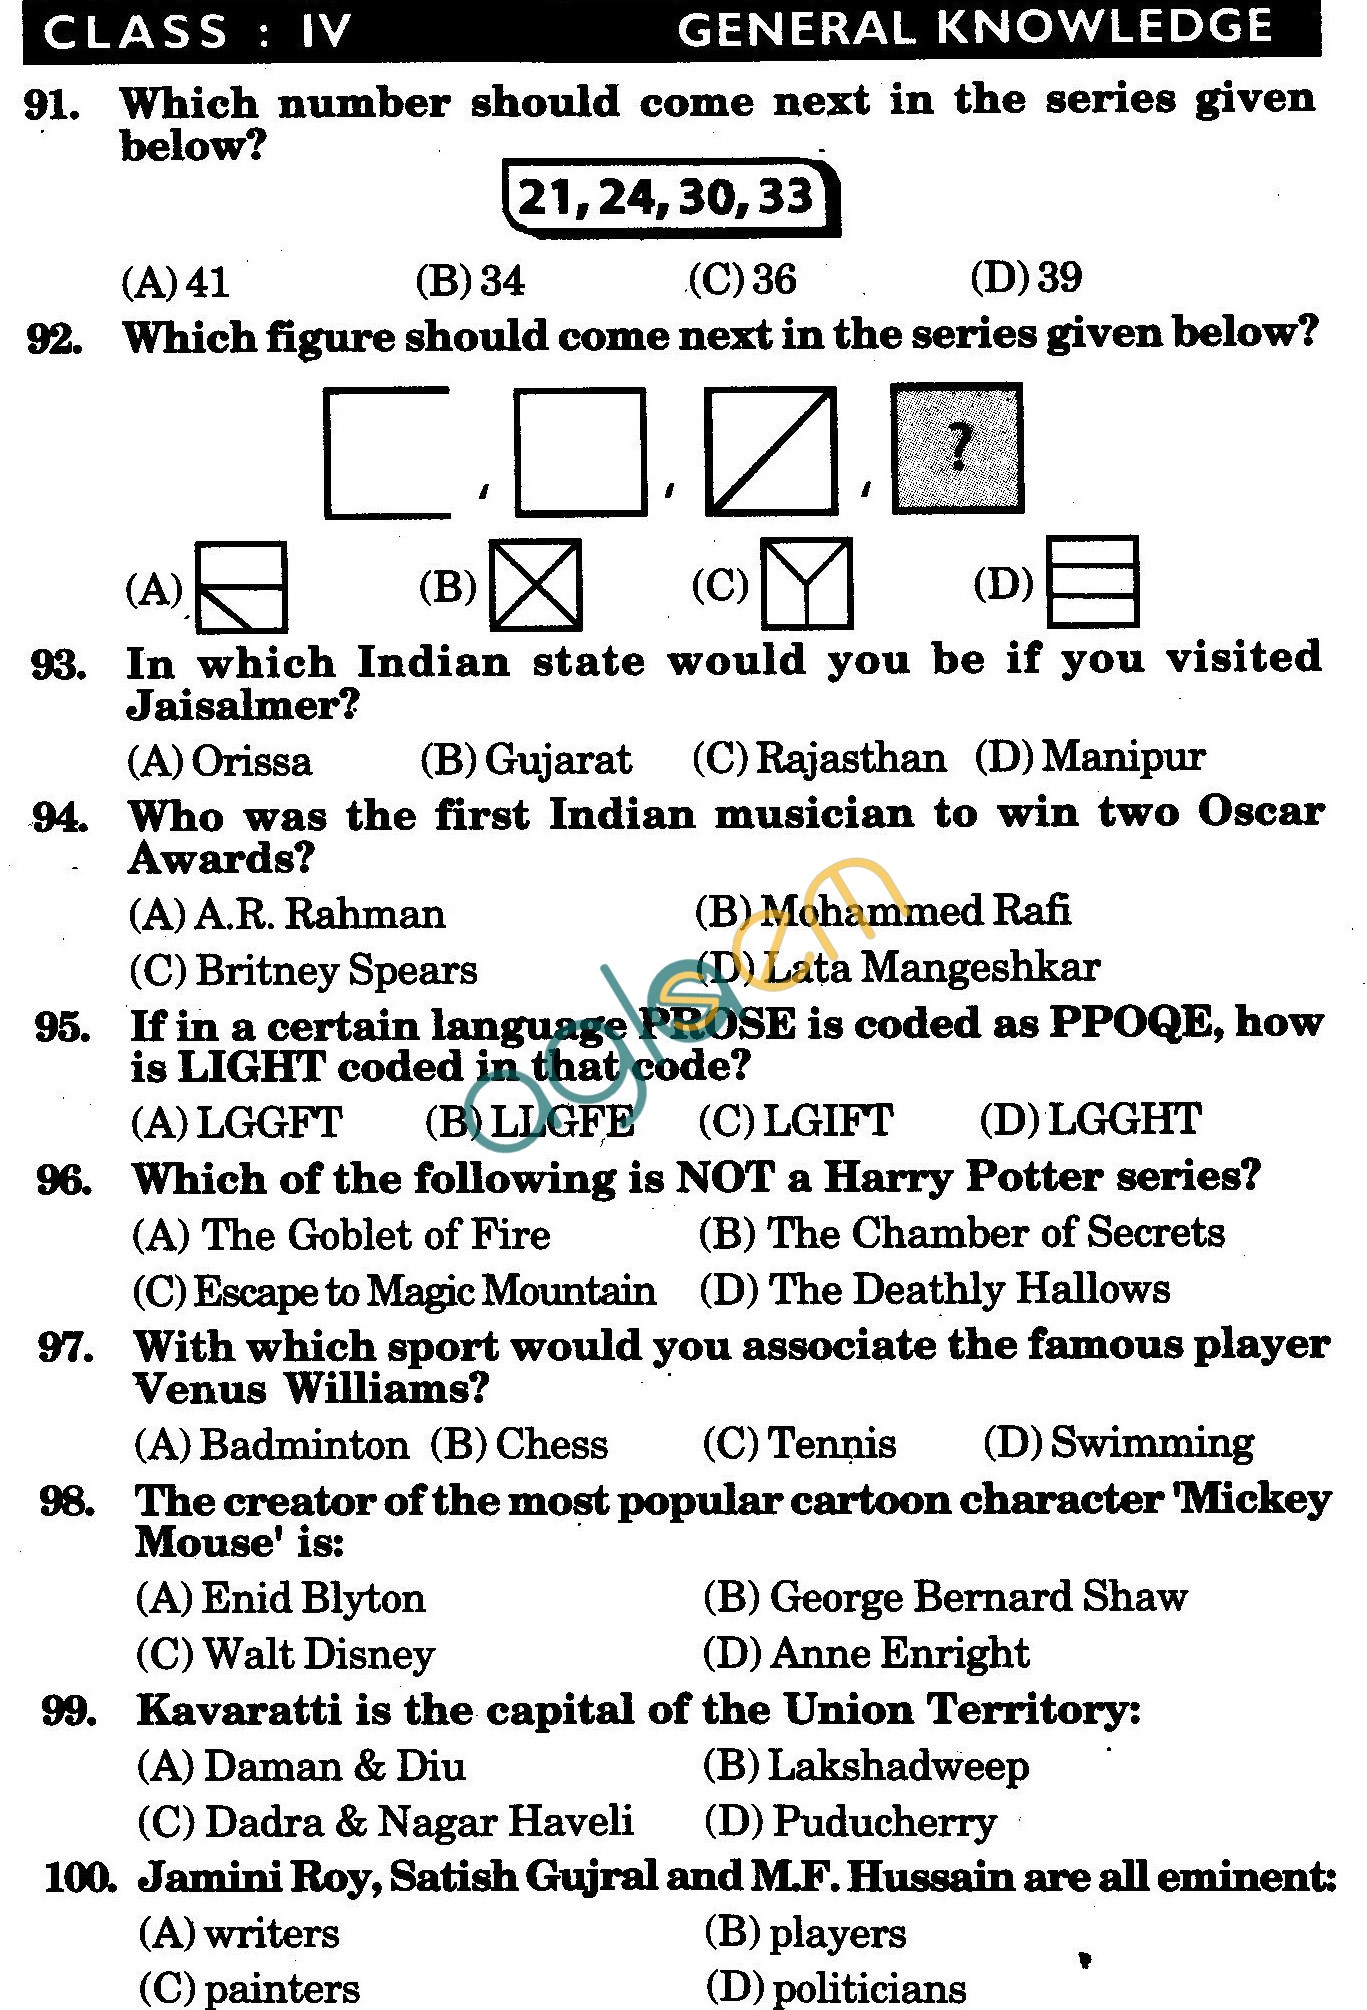 NSTSE 2010 Class IV Question Paper with Answers - General Knowledge